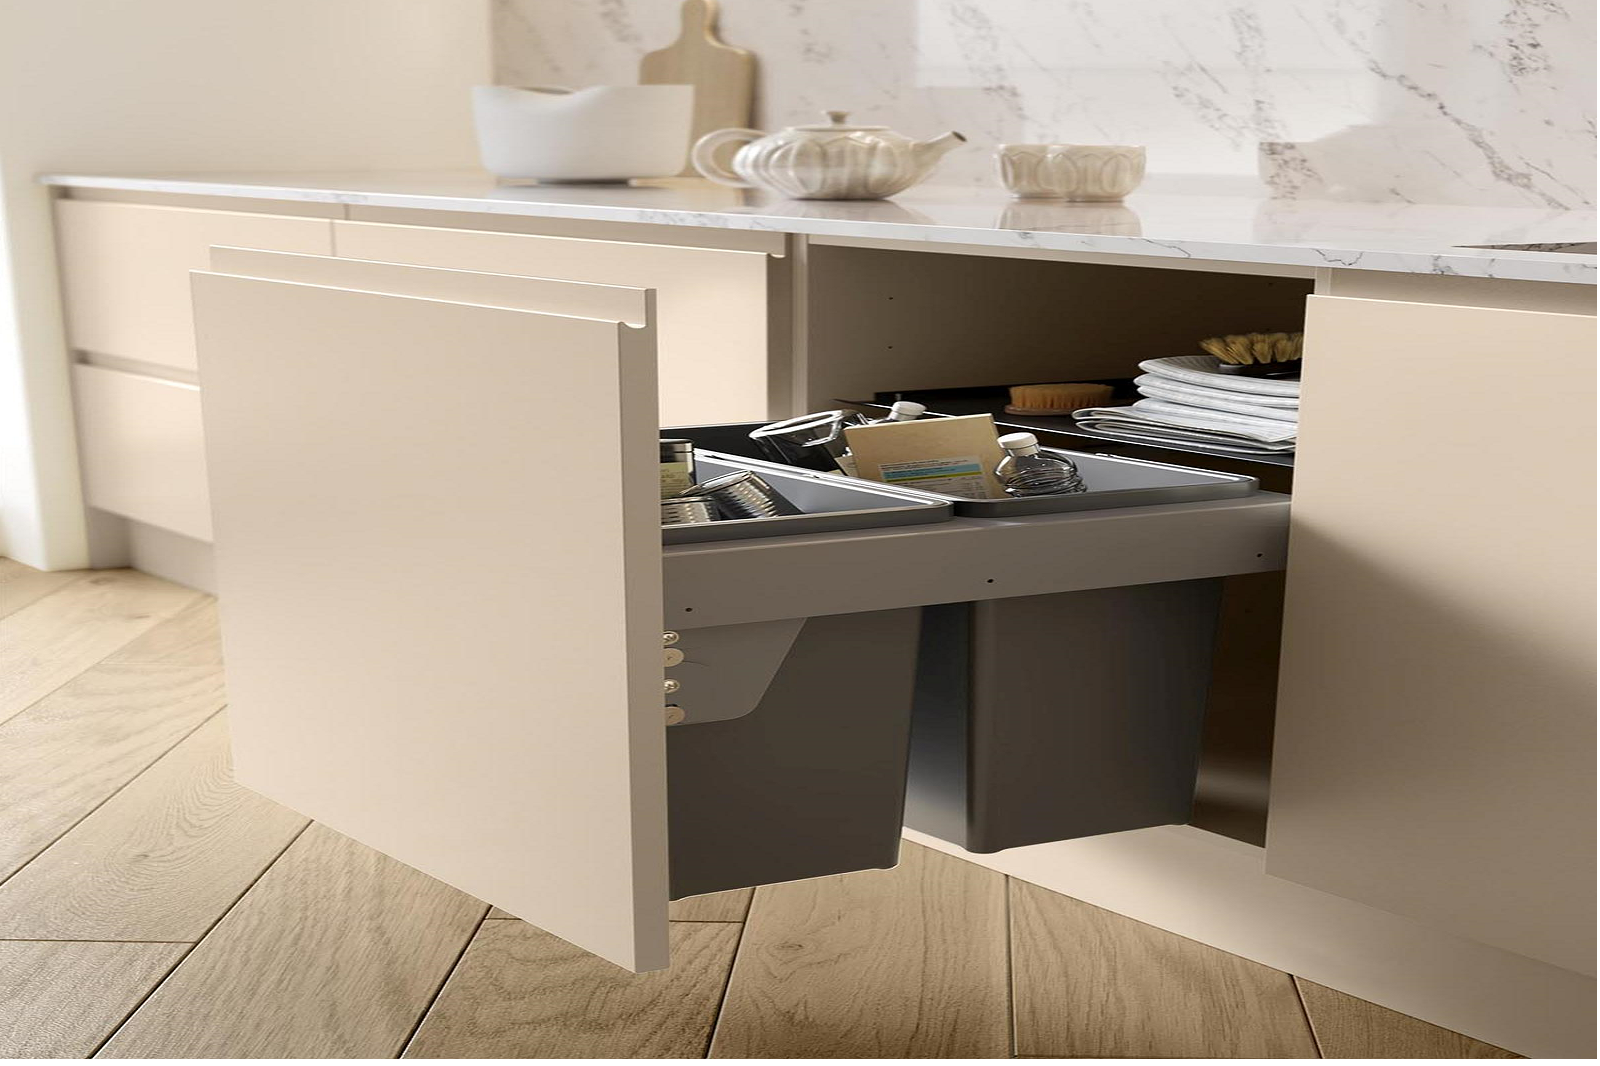 J-Pull Handleless kitchen painted matte cashmere featuring pull-out bin